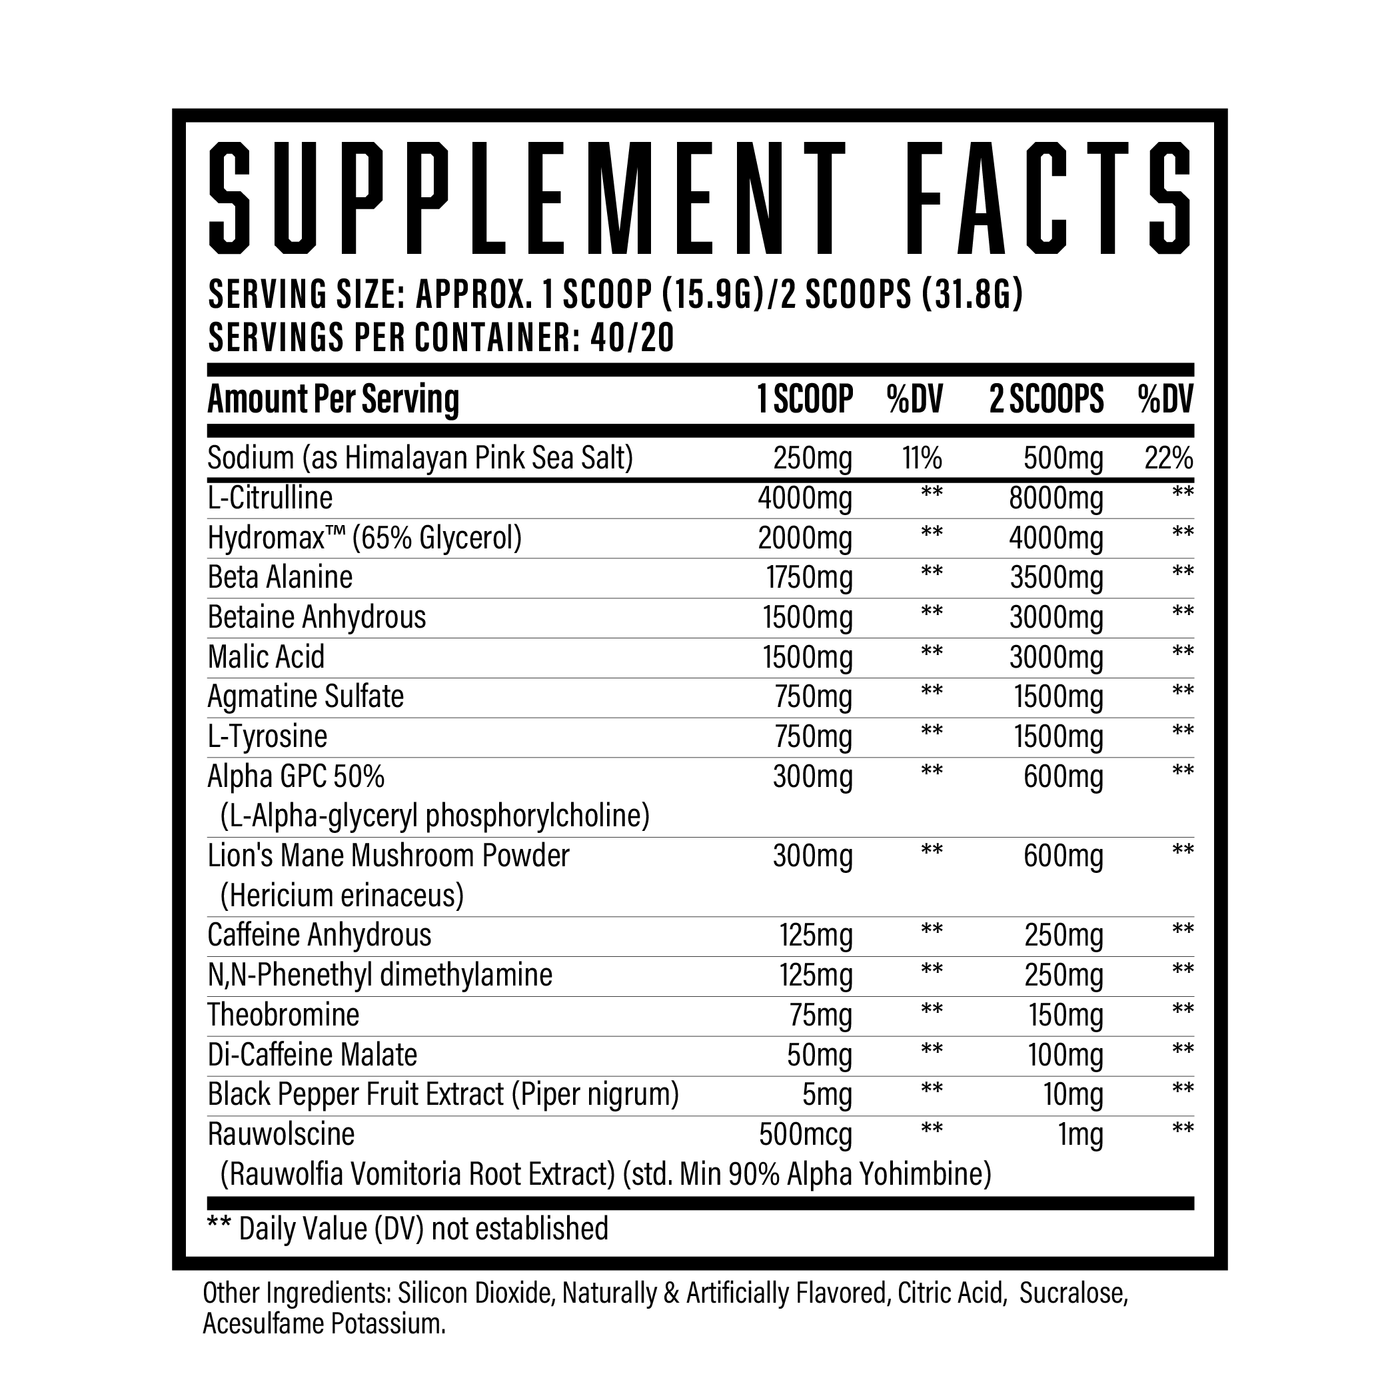 Wrecked Supplement Facts - Ingredients